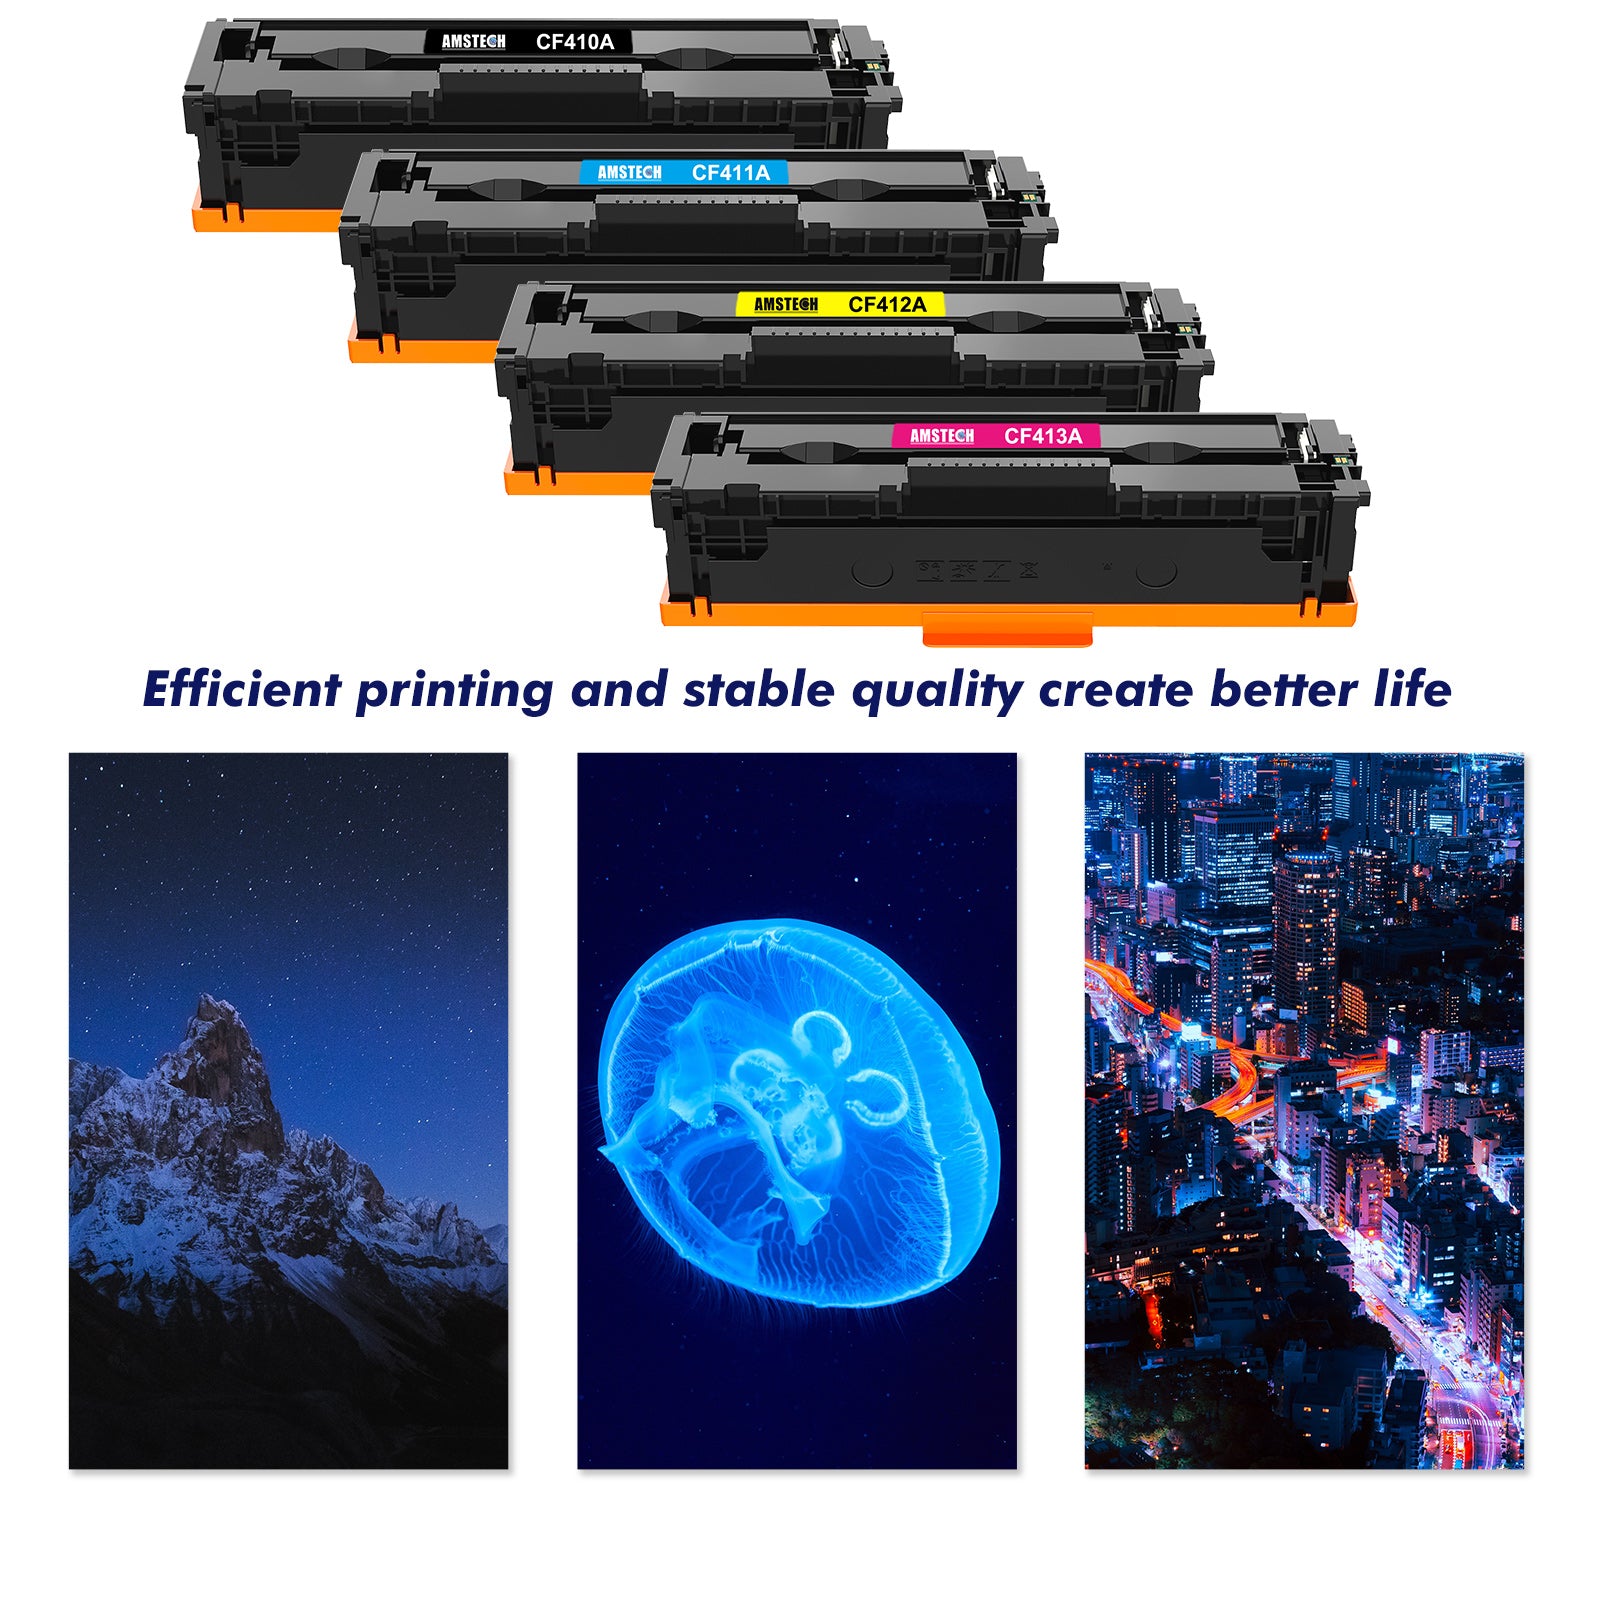 410A Toner Cartridge Compatible for HP 410A 410X CF410A CF410X Color Laserjet Pro MFP M477fnw M477fdw M477fdn M452dn M452nw M477 M452 M377 Printer Ink (Black Cyan Yellow Magenta, 4-Pack)